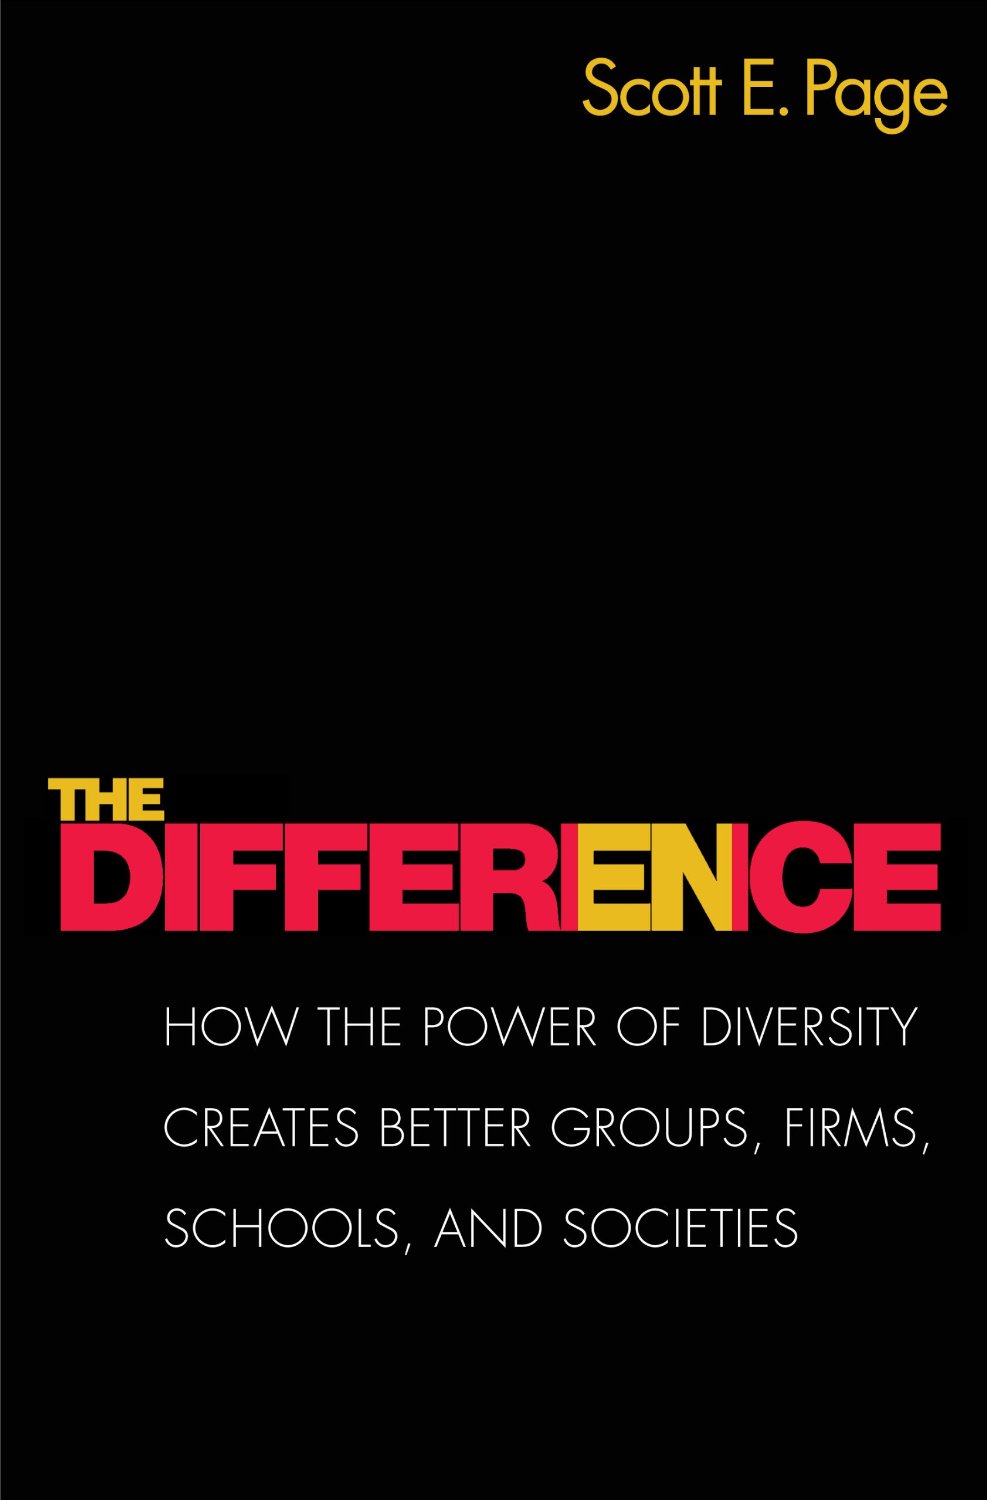 The Cover Page of The Difference: How the Power of Diversity Creates Better Groups, Firms, Schools and Societies.  Predominantly black, the title appears in bold colors, red and yellow, in the lower left corner.    